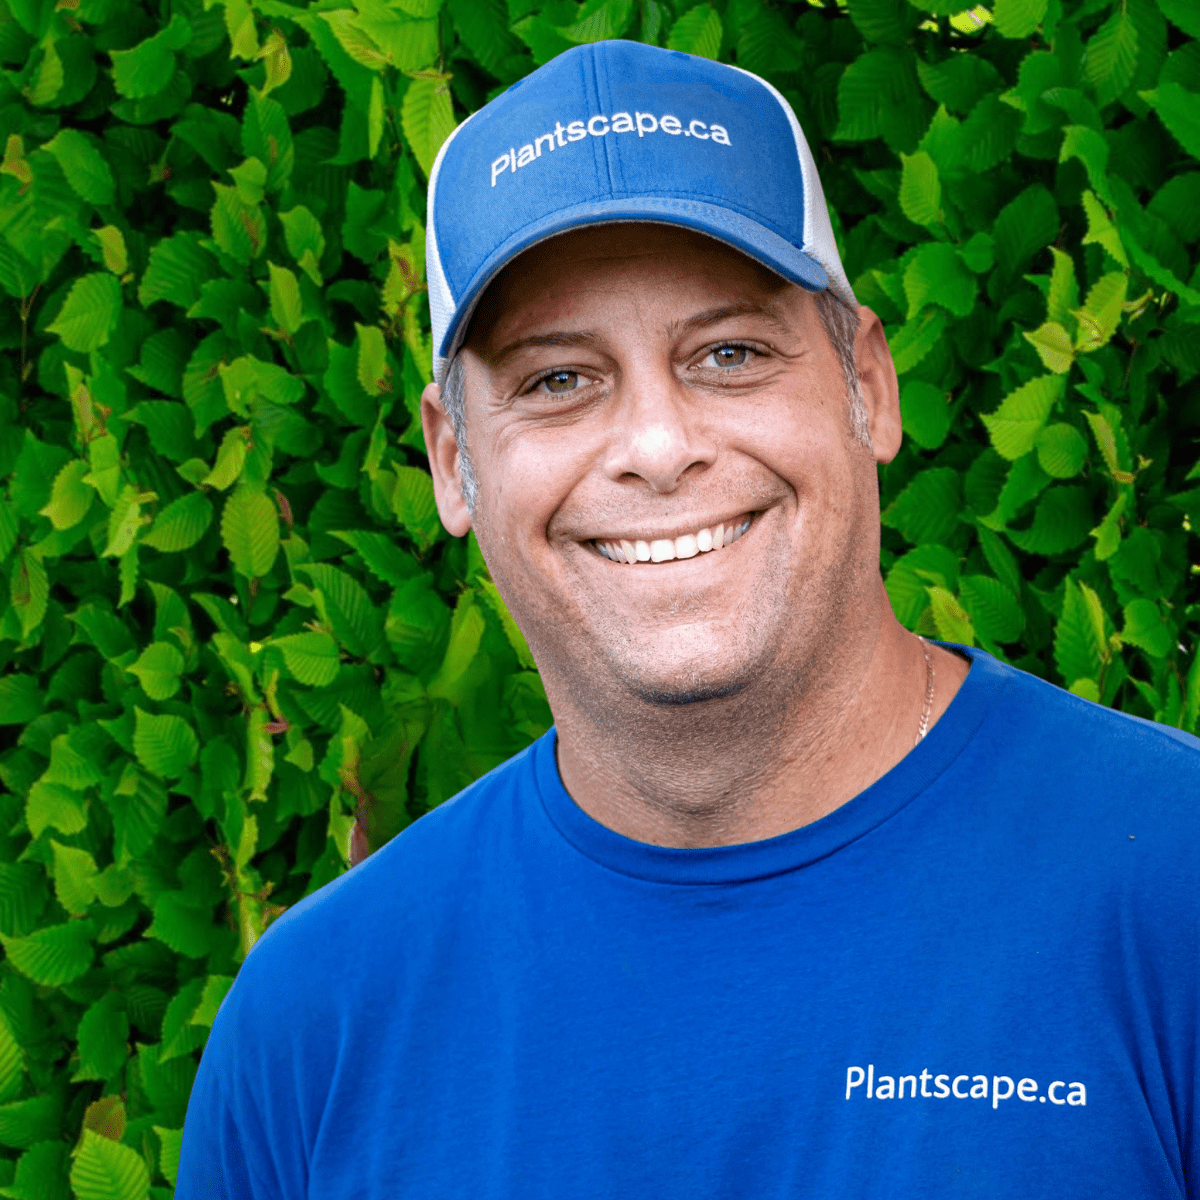 A person with a friendly smile, wearing a blue cap and t-shirt branded 'Plantscape.ca,' stands in front of a lush green leafy background.